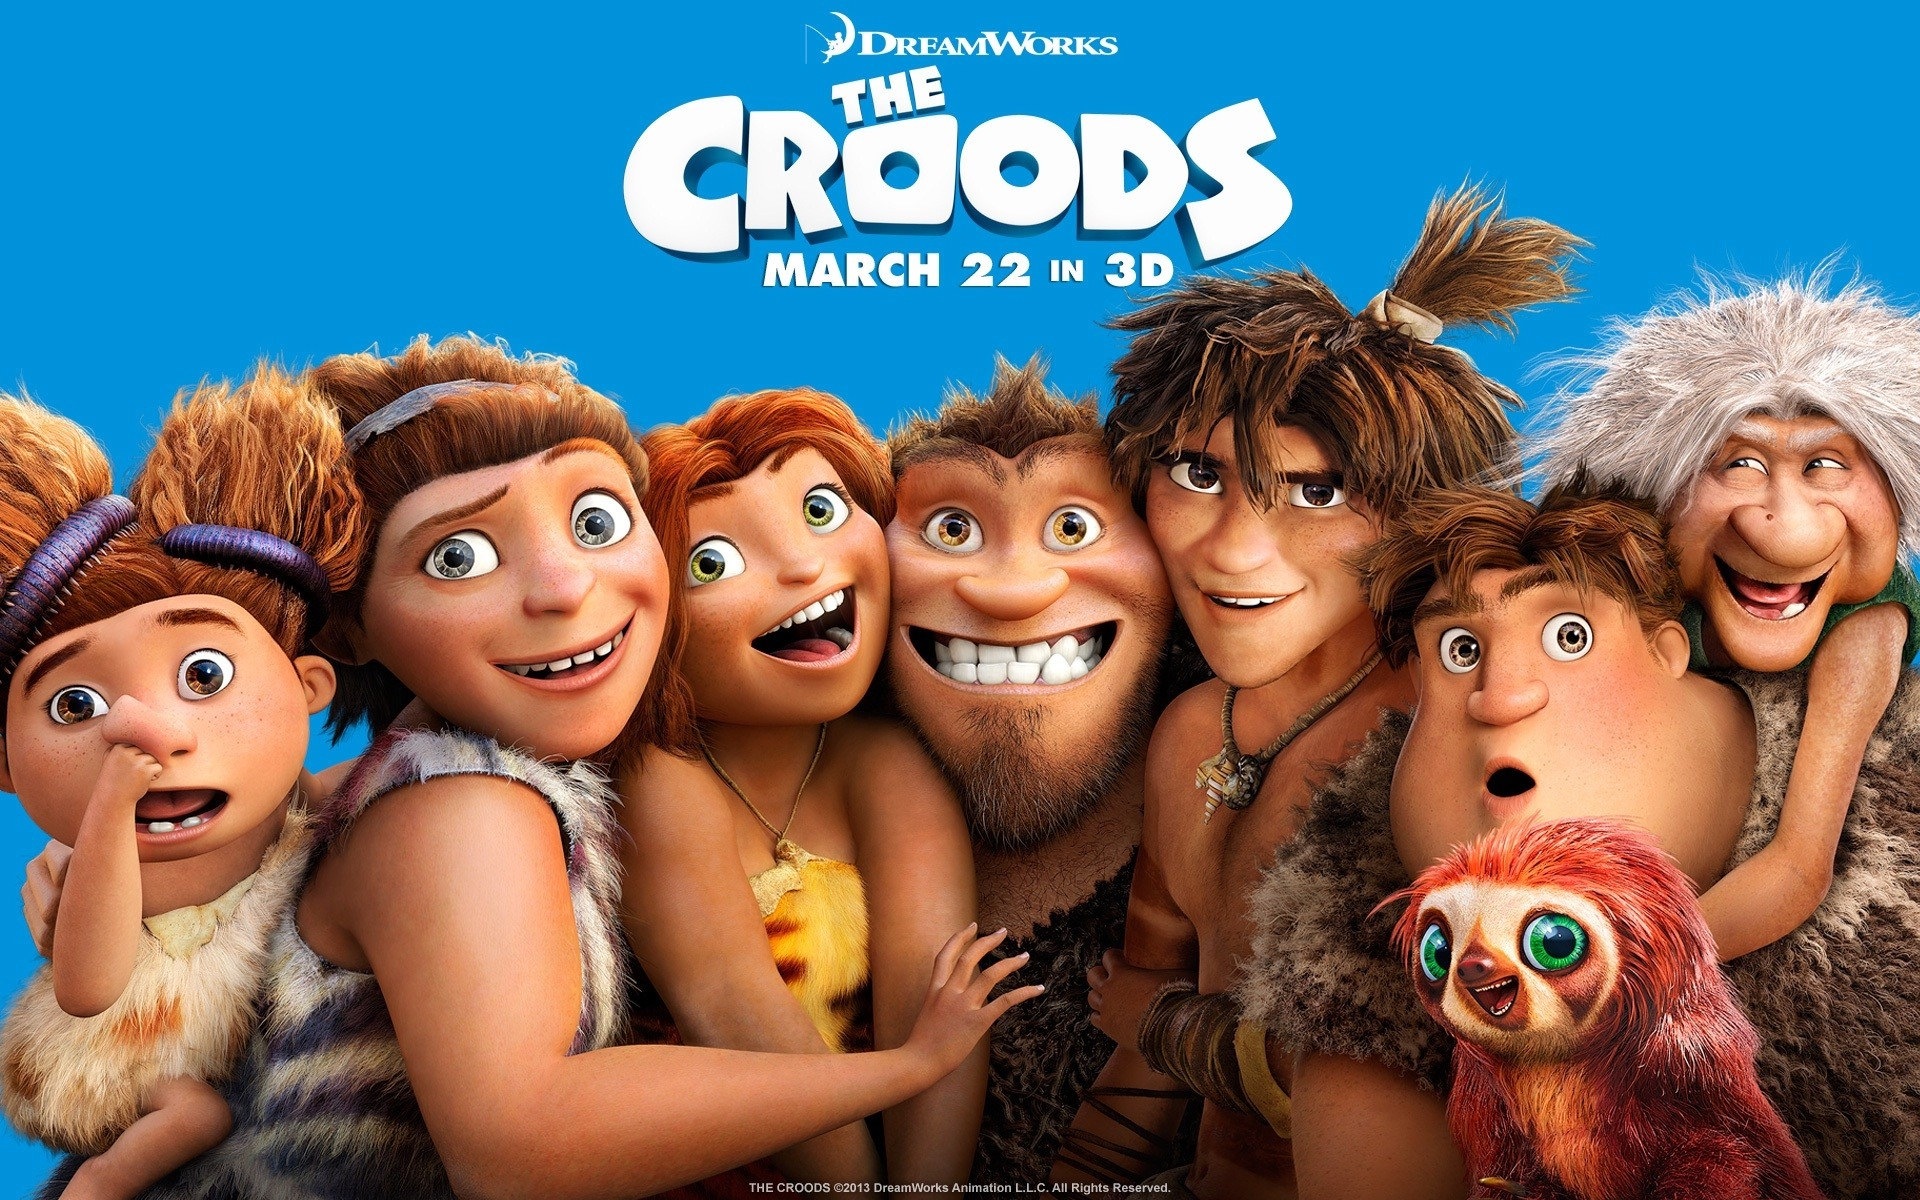 The Croods HD movie wallpapers #3 - 1920x1200